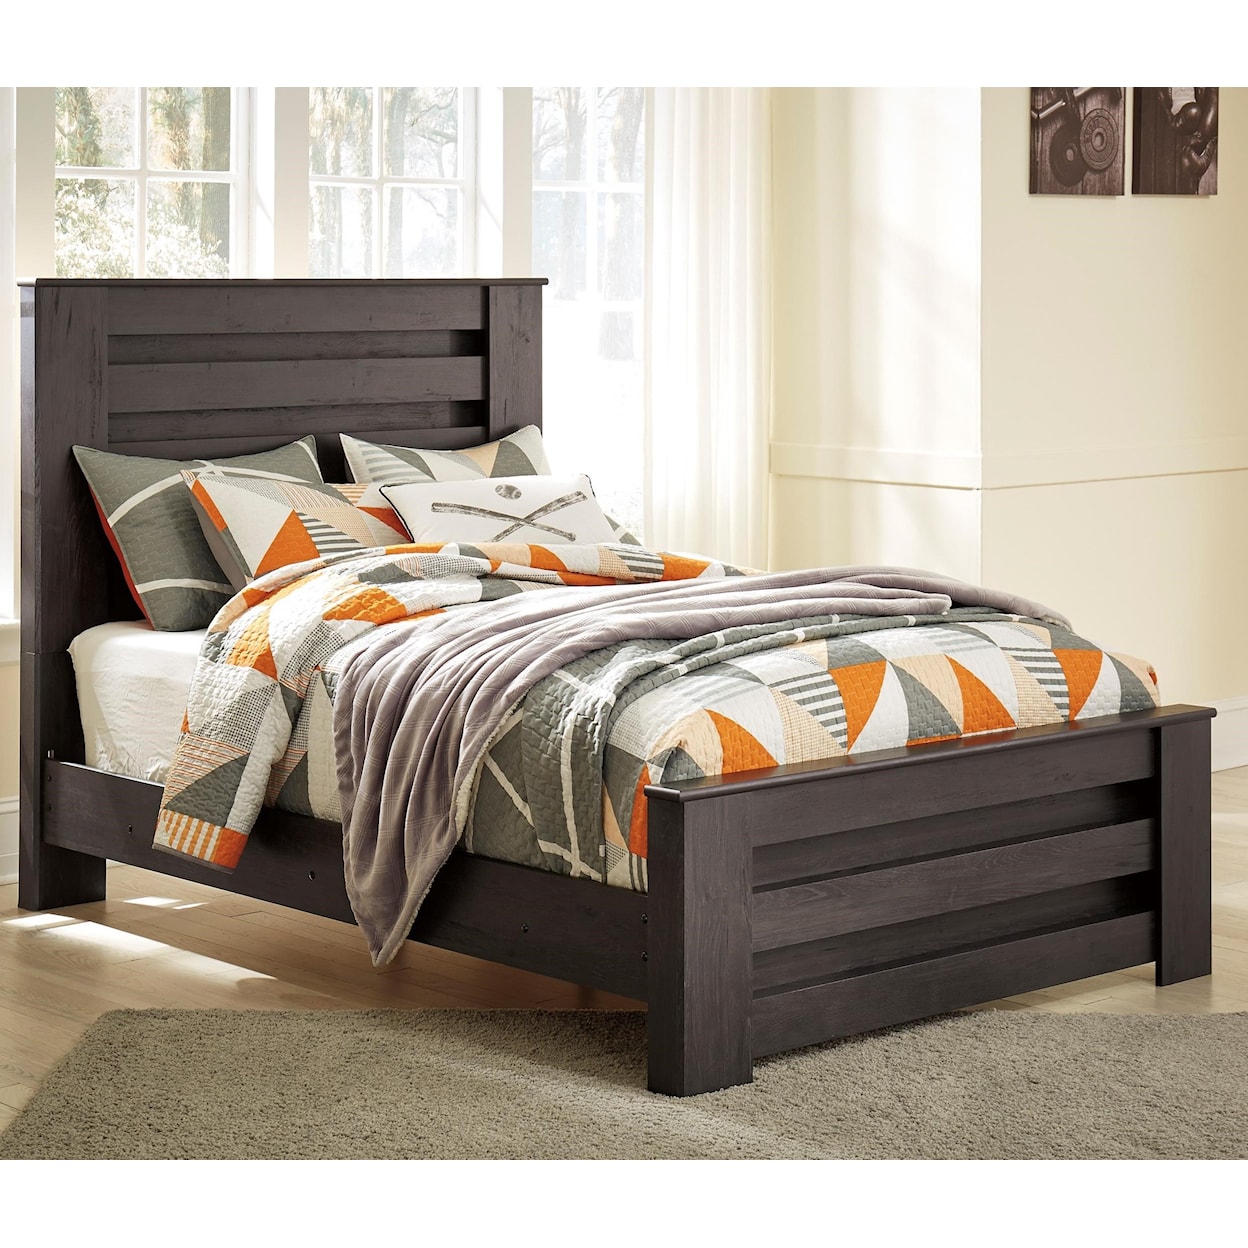 Signature Design by Ashley Brinxton Full Panel Bed